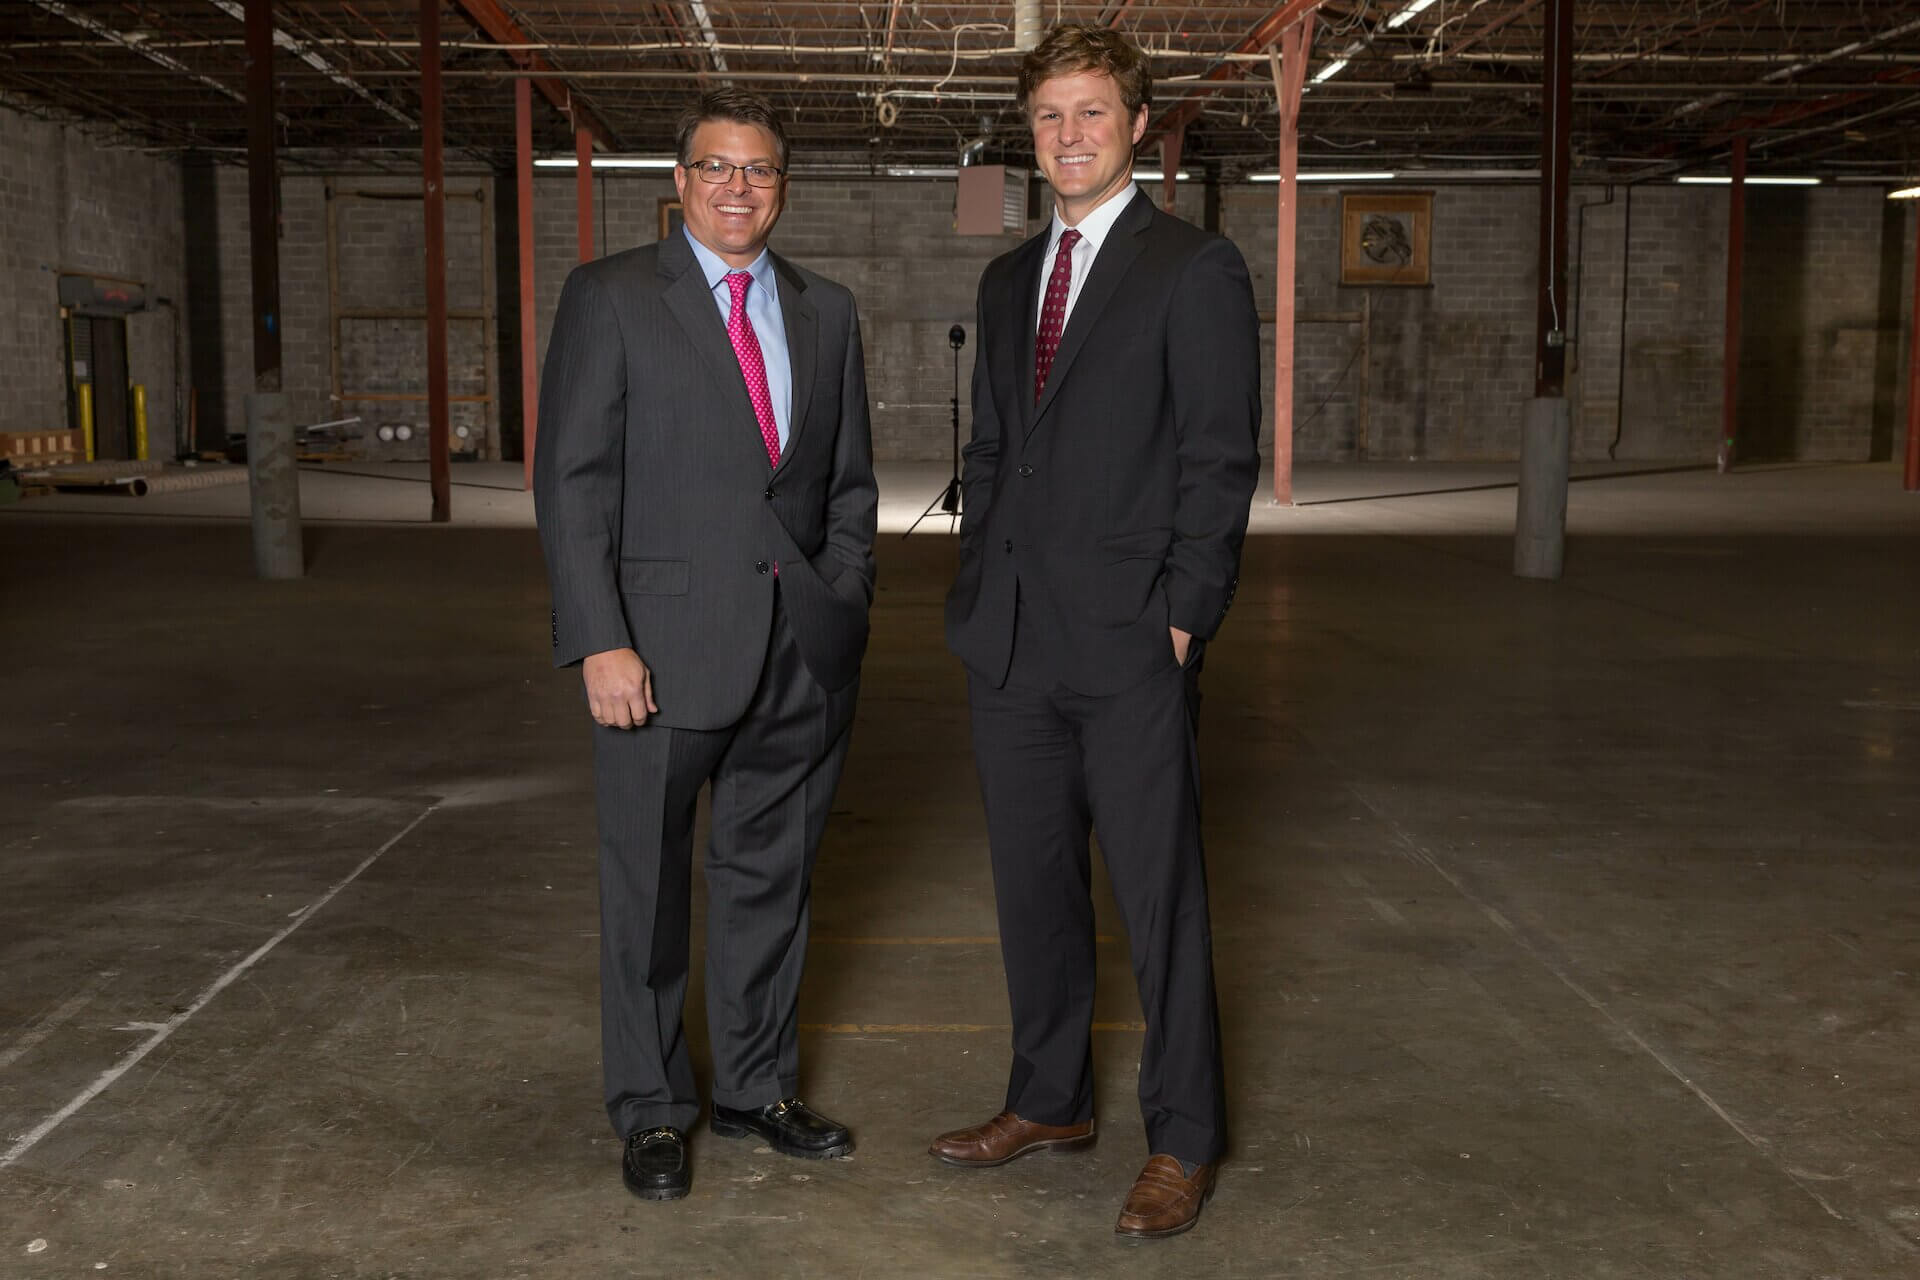 Two Wilson Hull & Neal employees standing in a commercial building